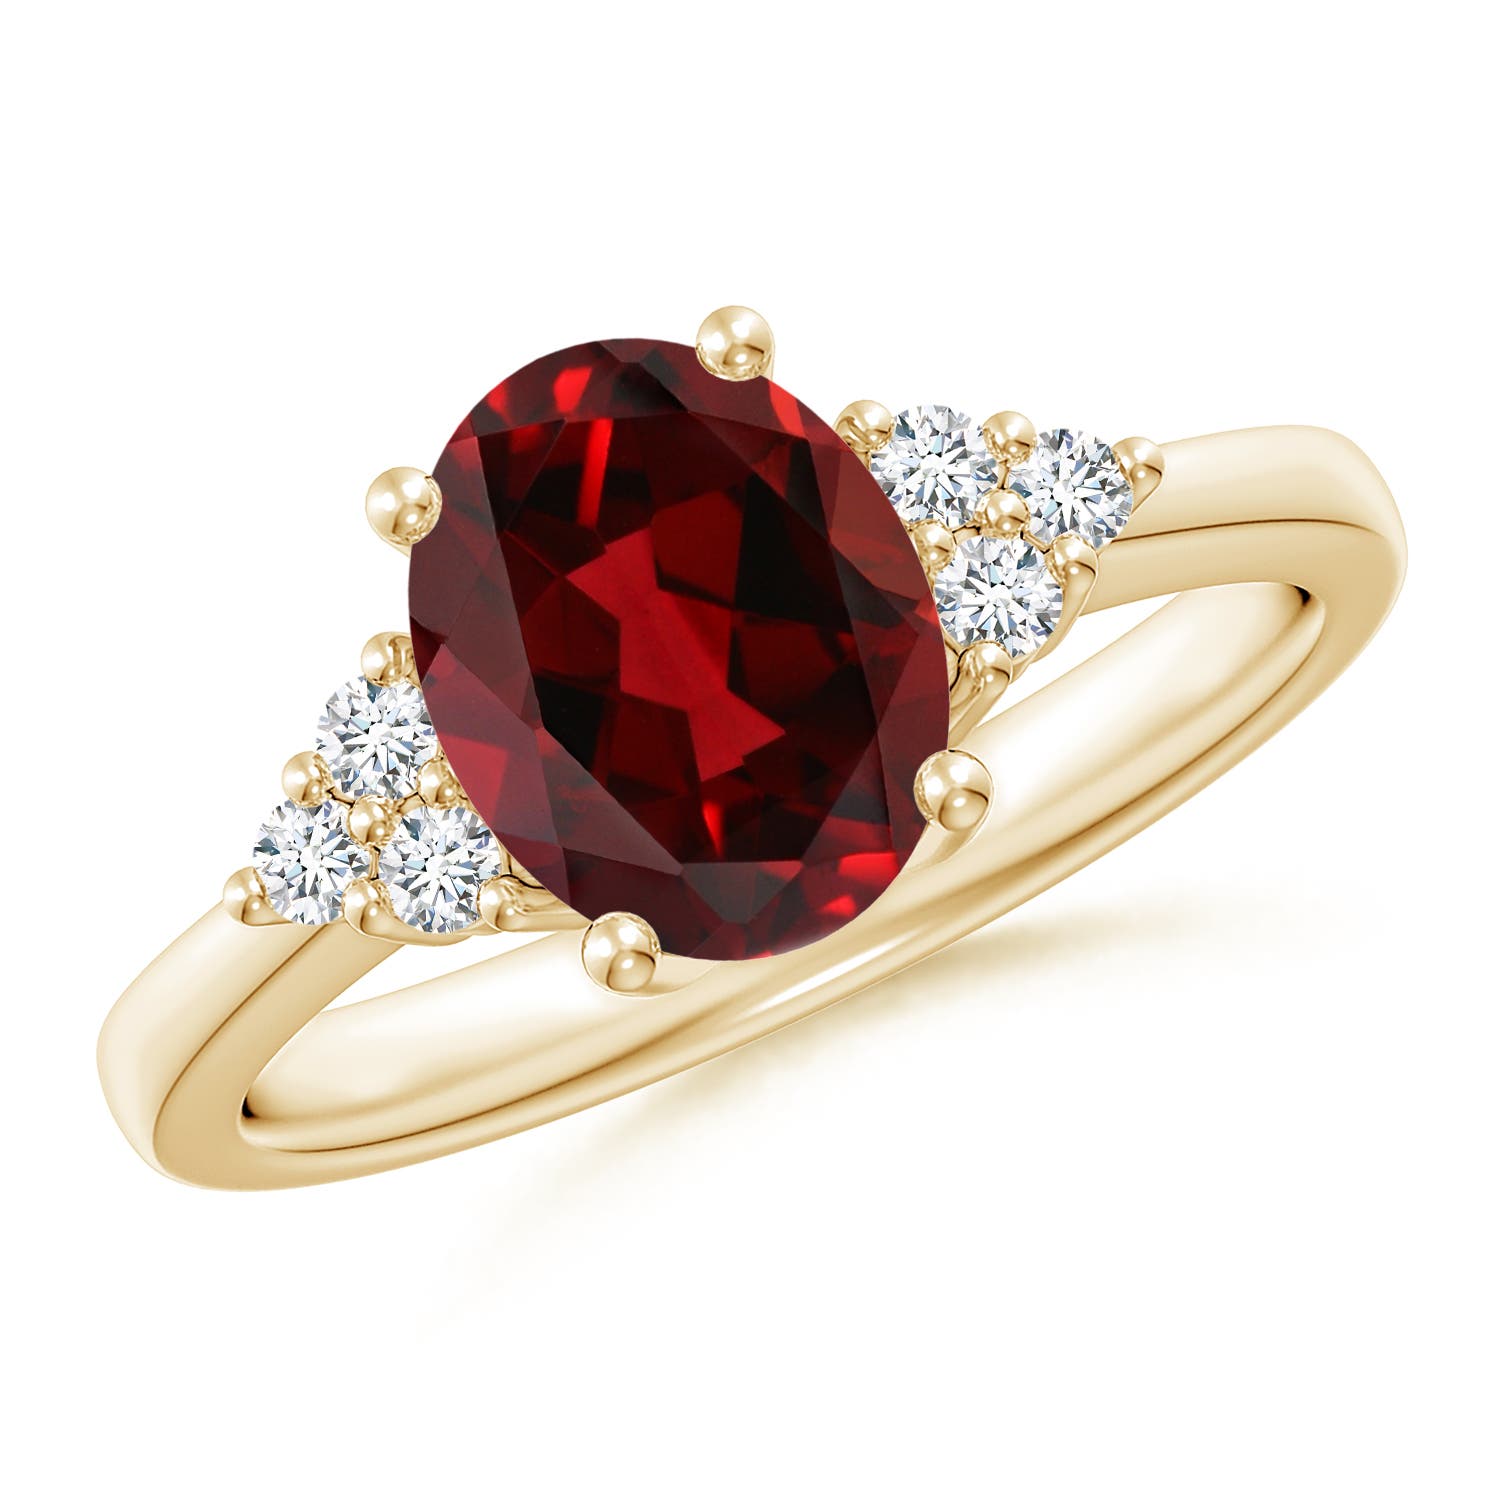 Solitaire Oval Garnet Ring with Trio Diamond Accents | Angara UK